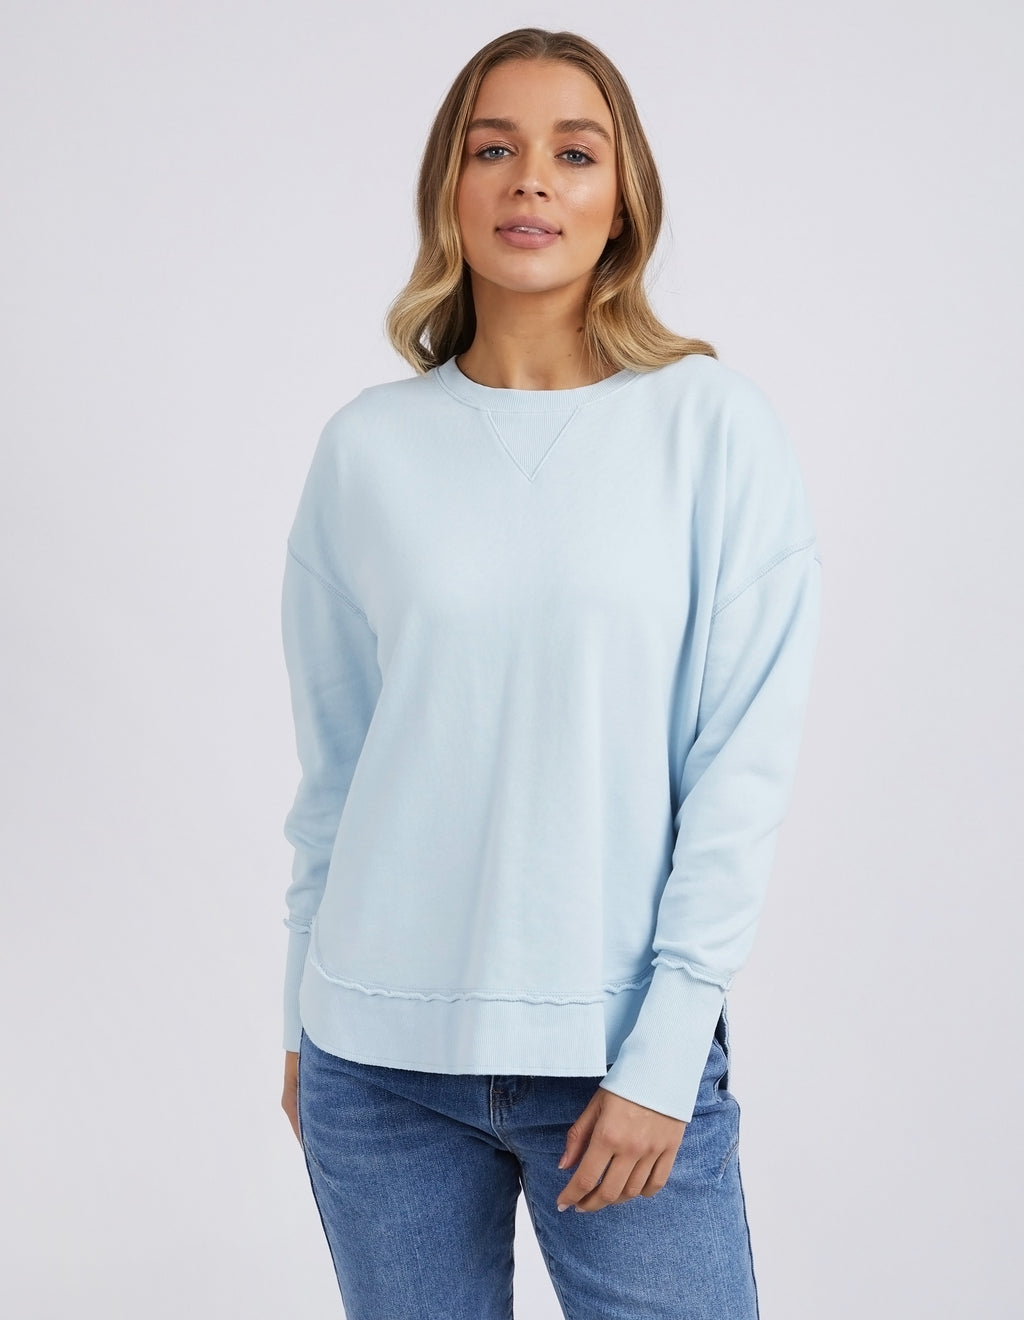 delilah knit crew jumper by foxwood